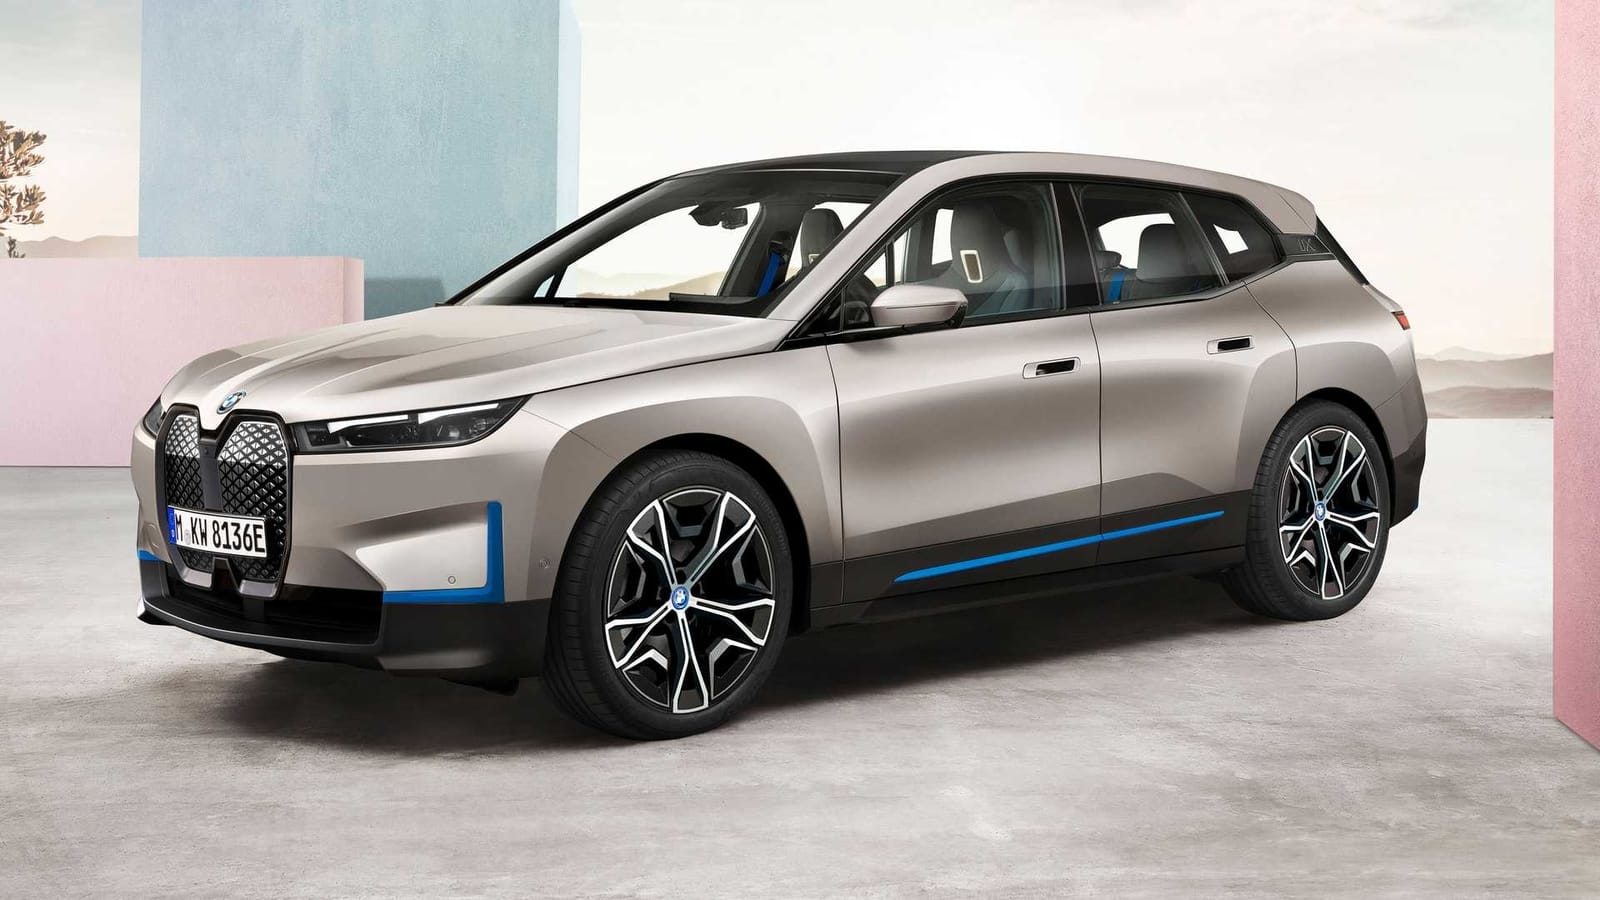 BMW Working On Electrifying 20% Of Its Lineup By 2023 - Report